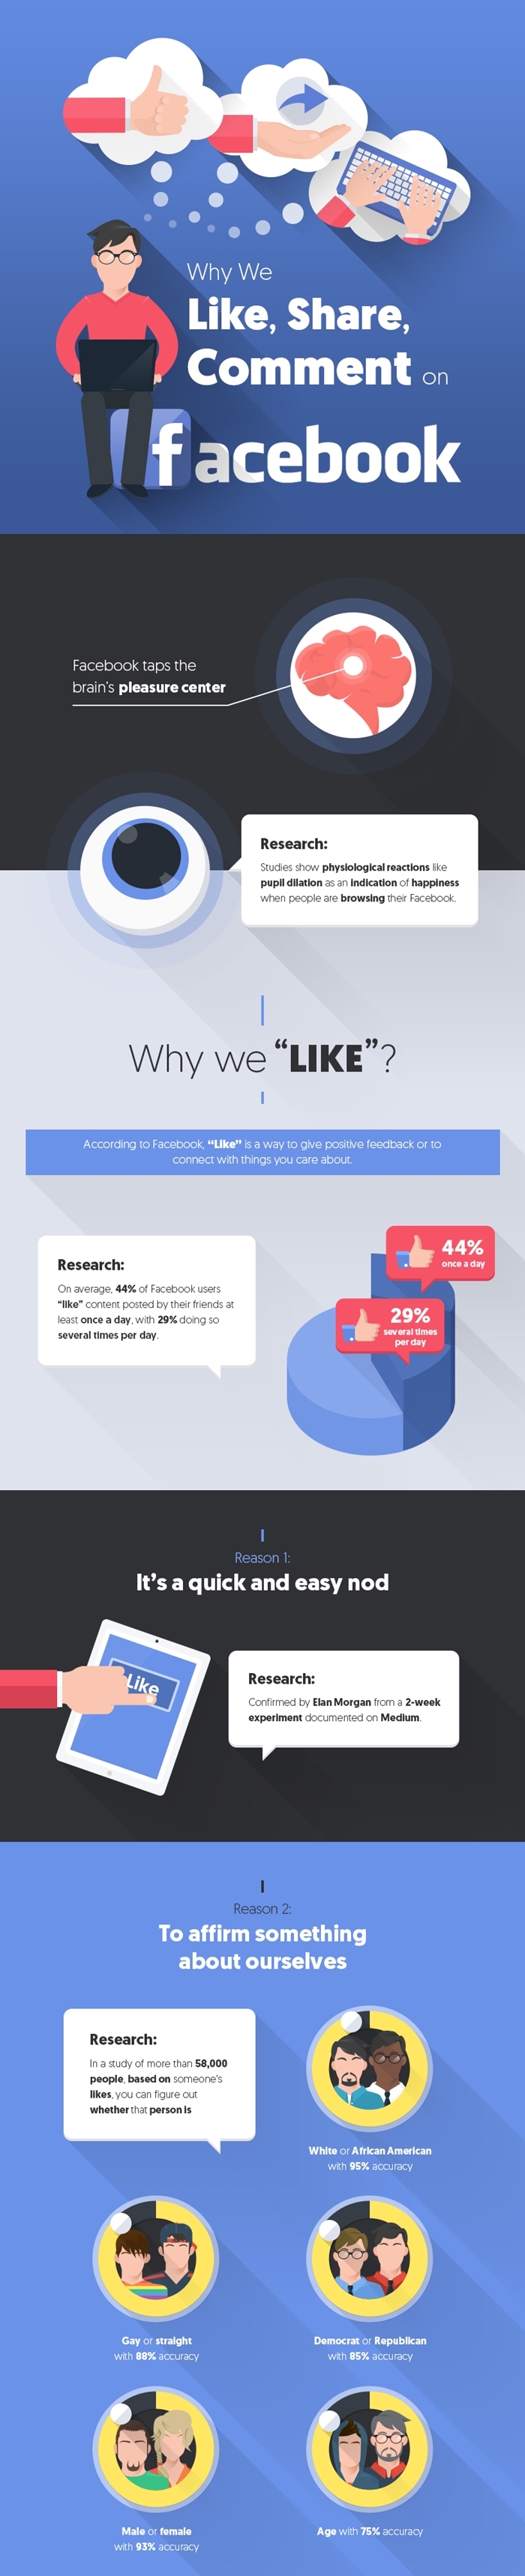 Why-We-Like-Share-Comment-on-Facebook-1